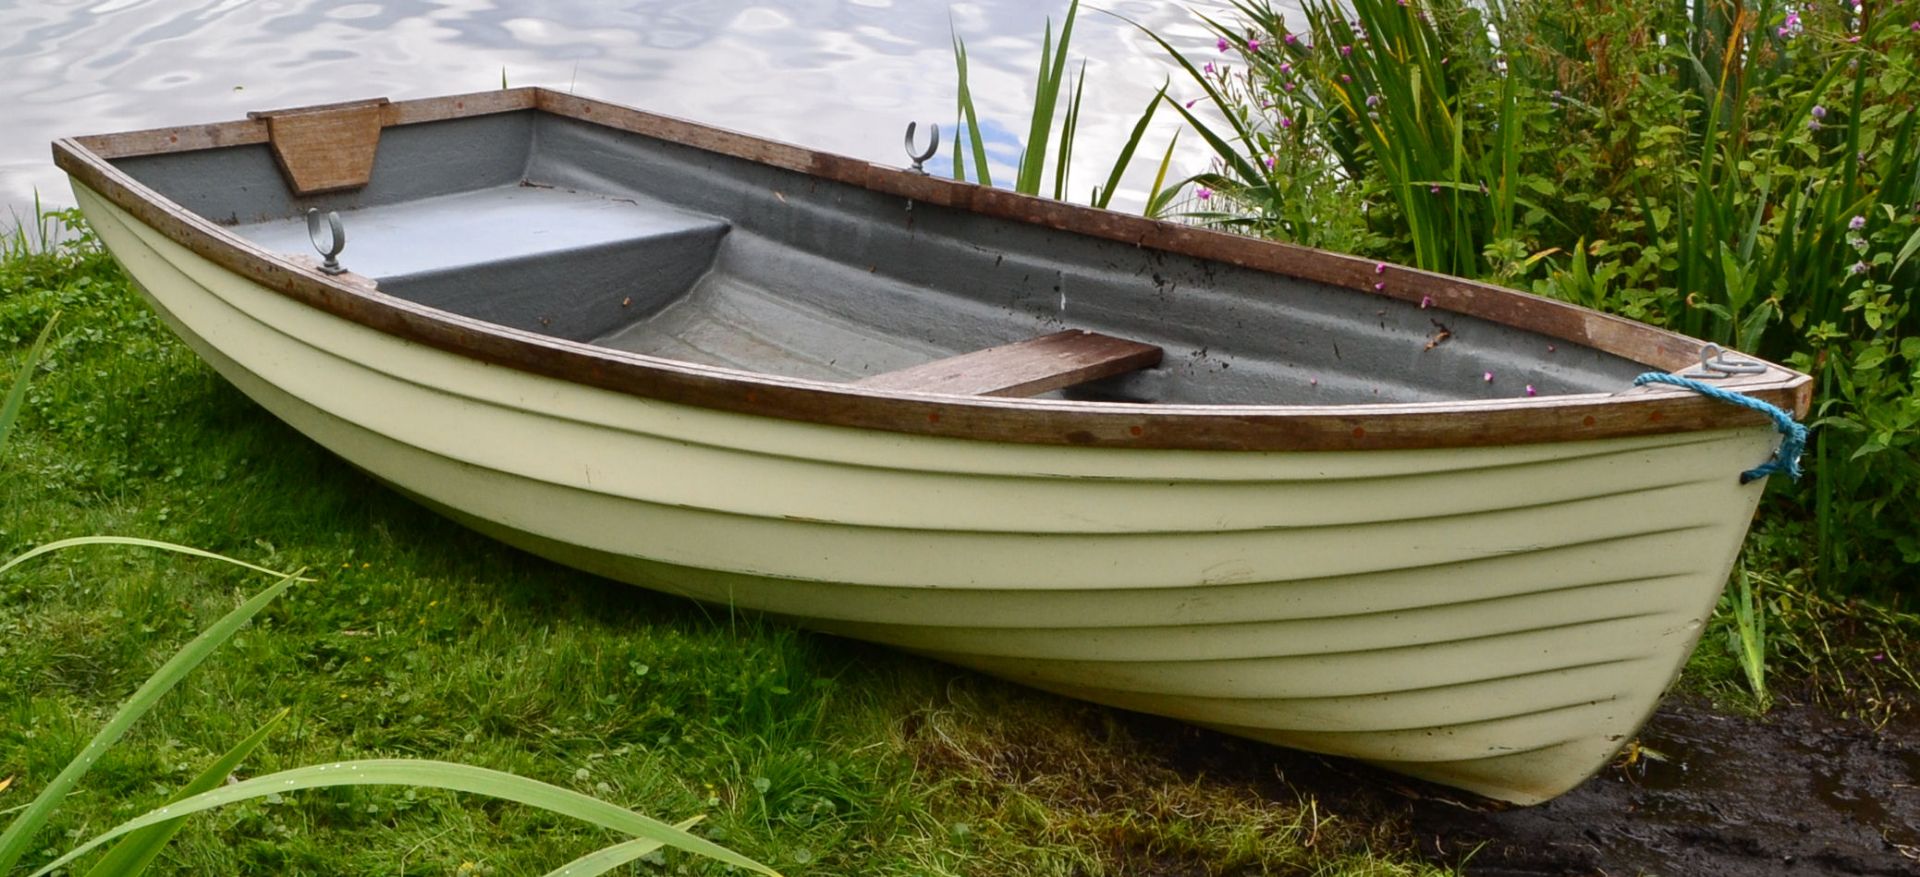 1 x Clovelly 290 Glass Fibre Rowing Boat - 240Kg Maximum Load - CL226 - Location: Knutsford WA16 - Image 2 of 15